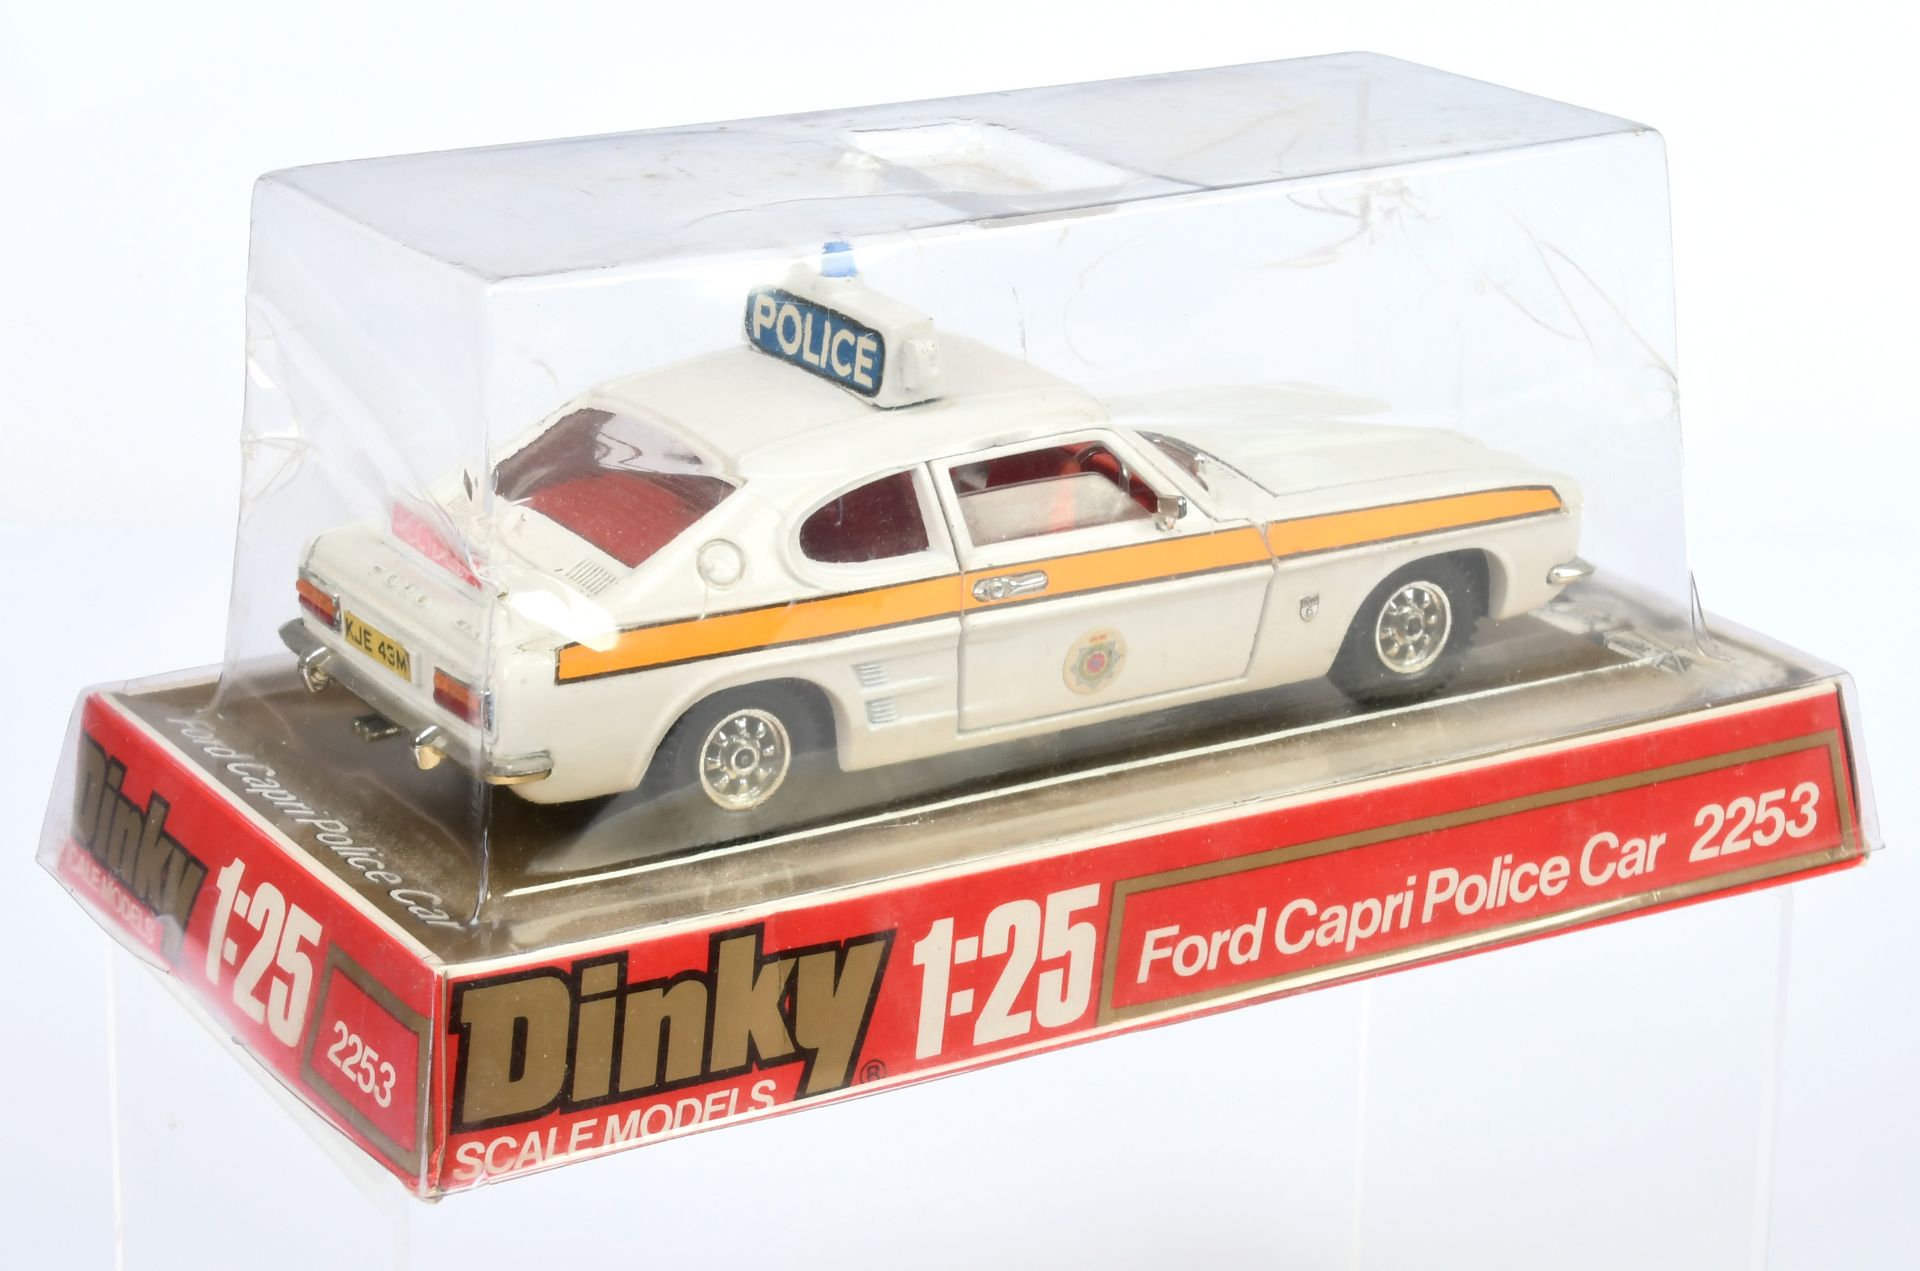 Dinky Toys 2253 (1/25th) Ford Capri "Police" - White body, red interior, chrome trim, roof box wi... - Image 2 of 2